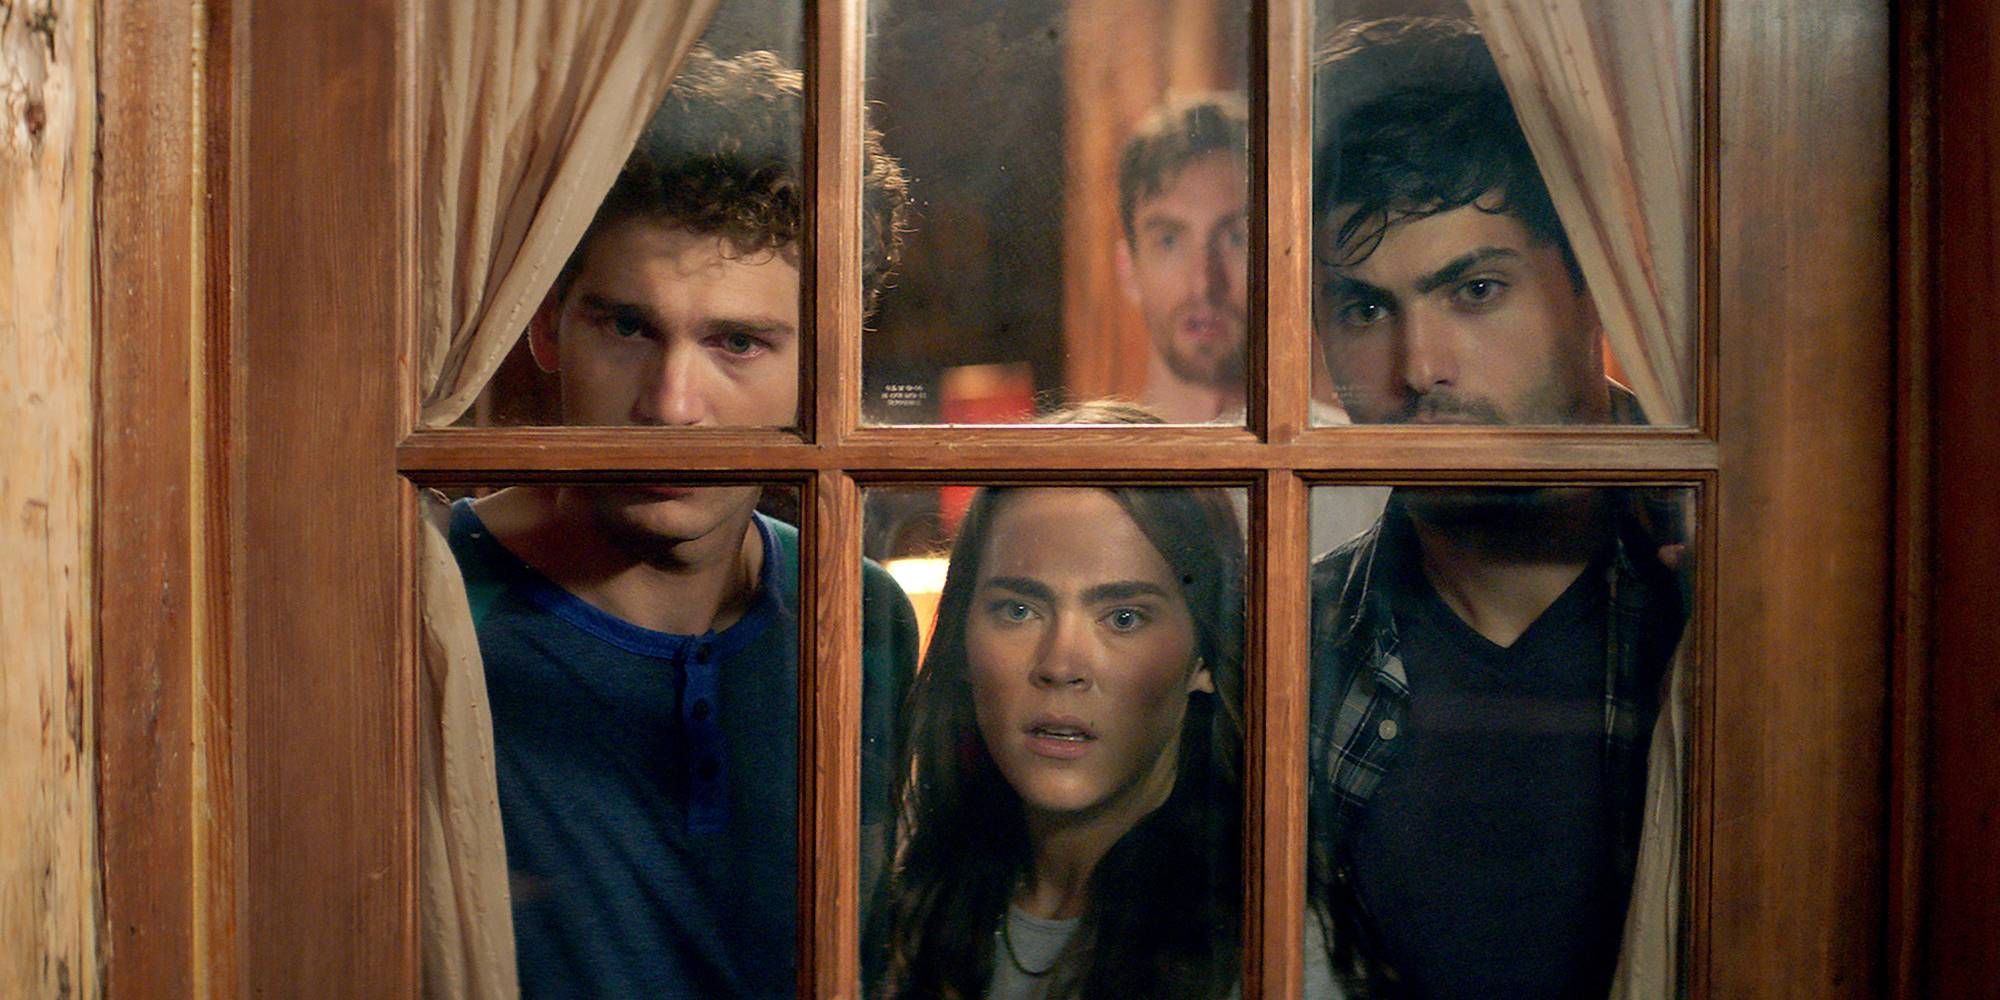 Four young people looking through a window in Cabin Fever